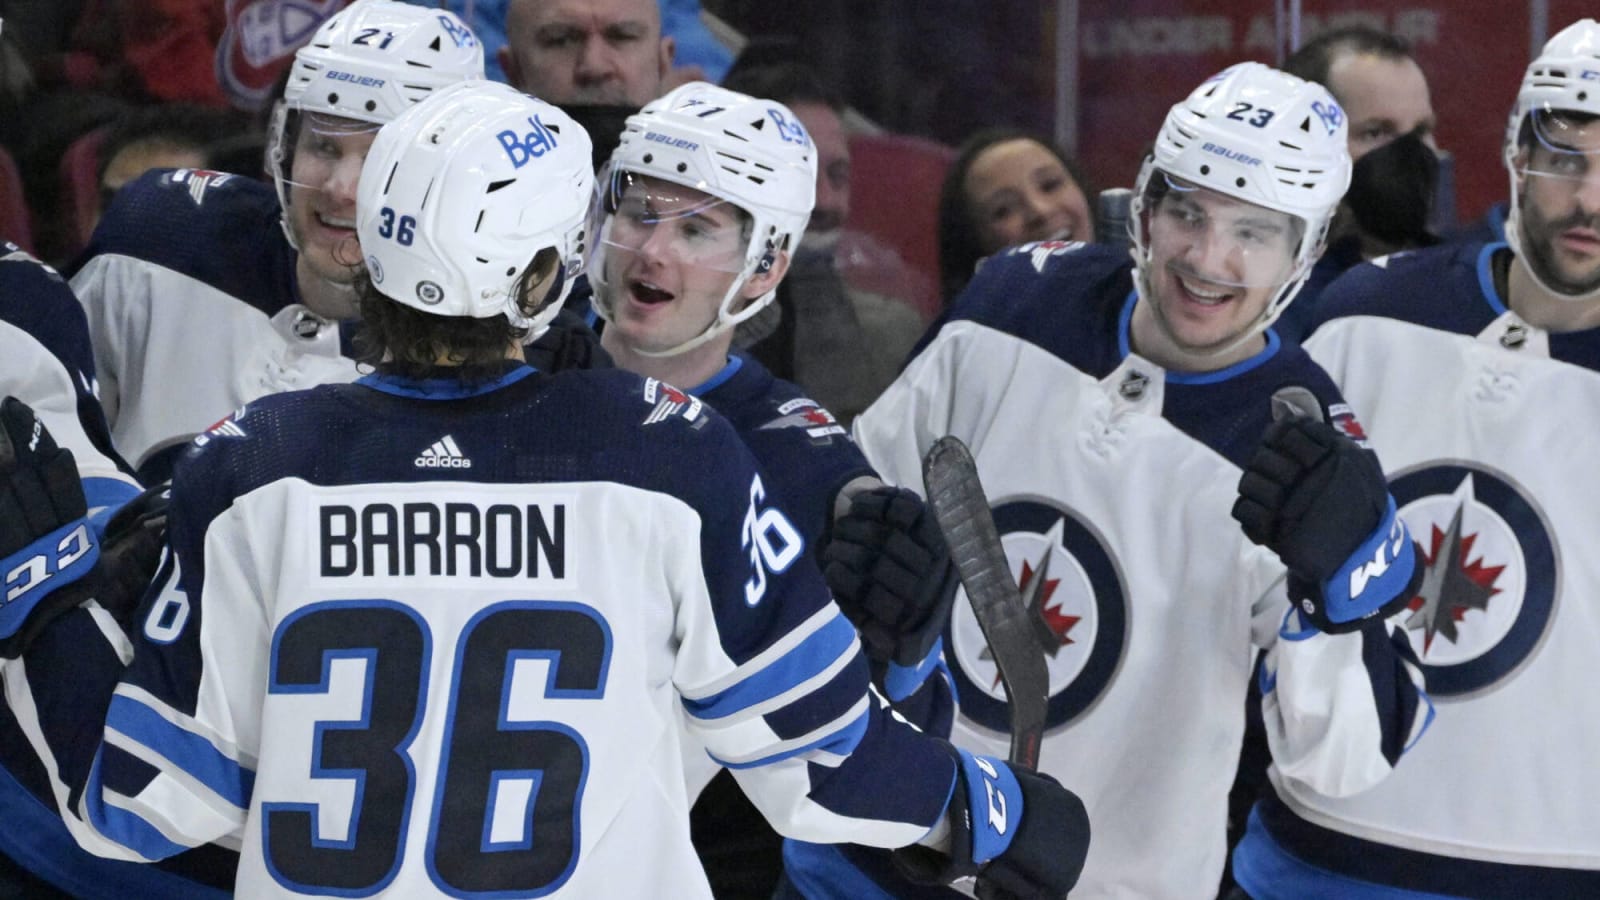 Morgan Barron picks up first Jets goal and assist in second period against Habs